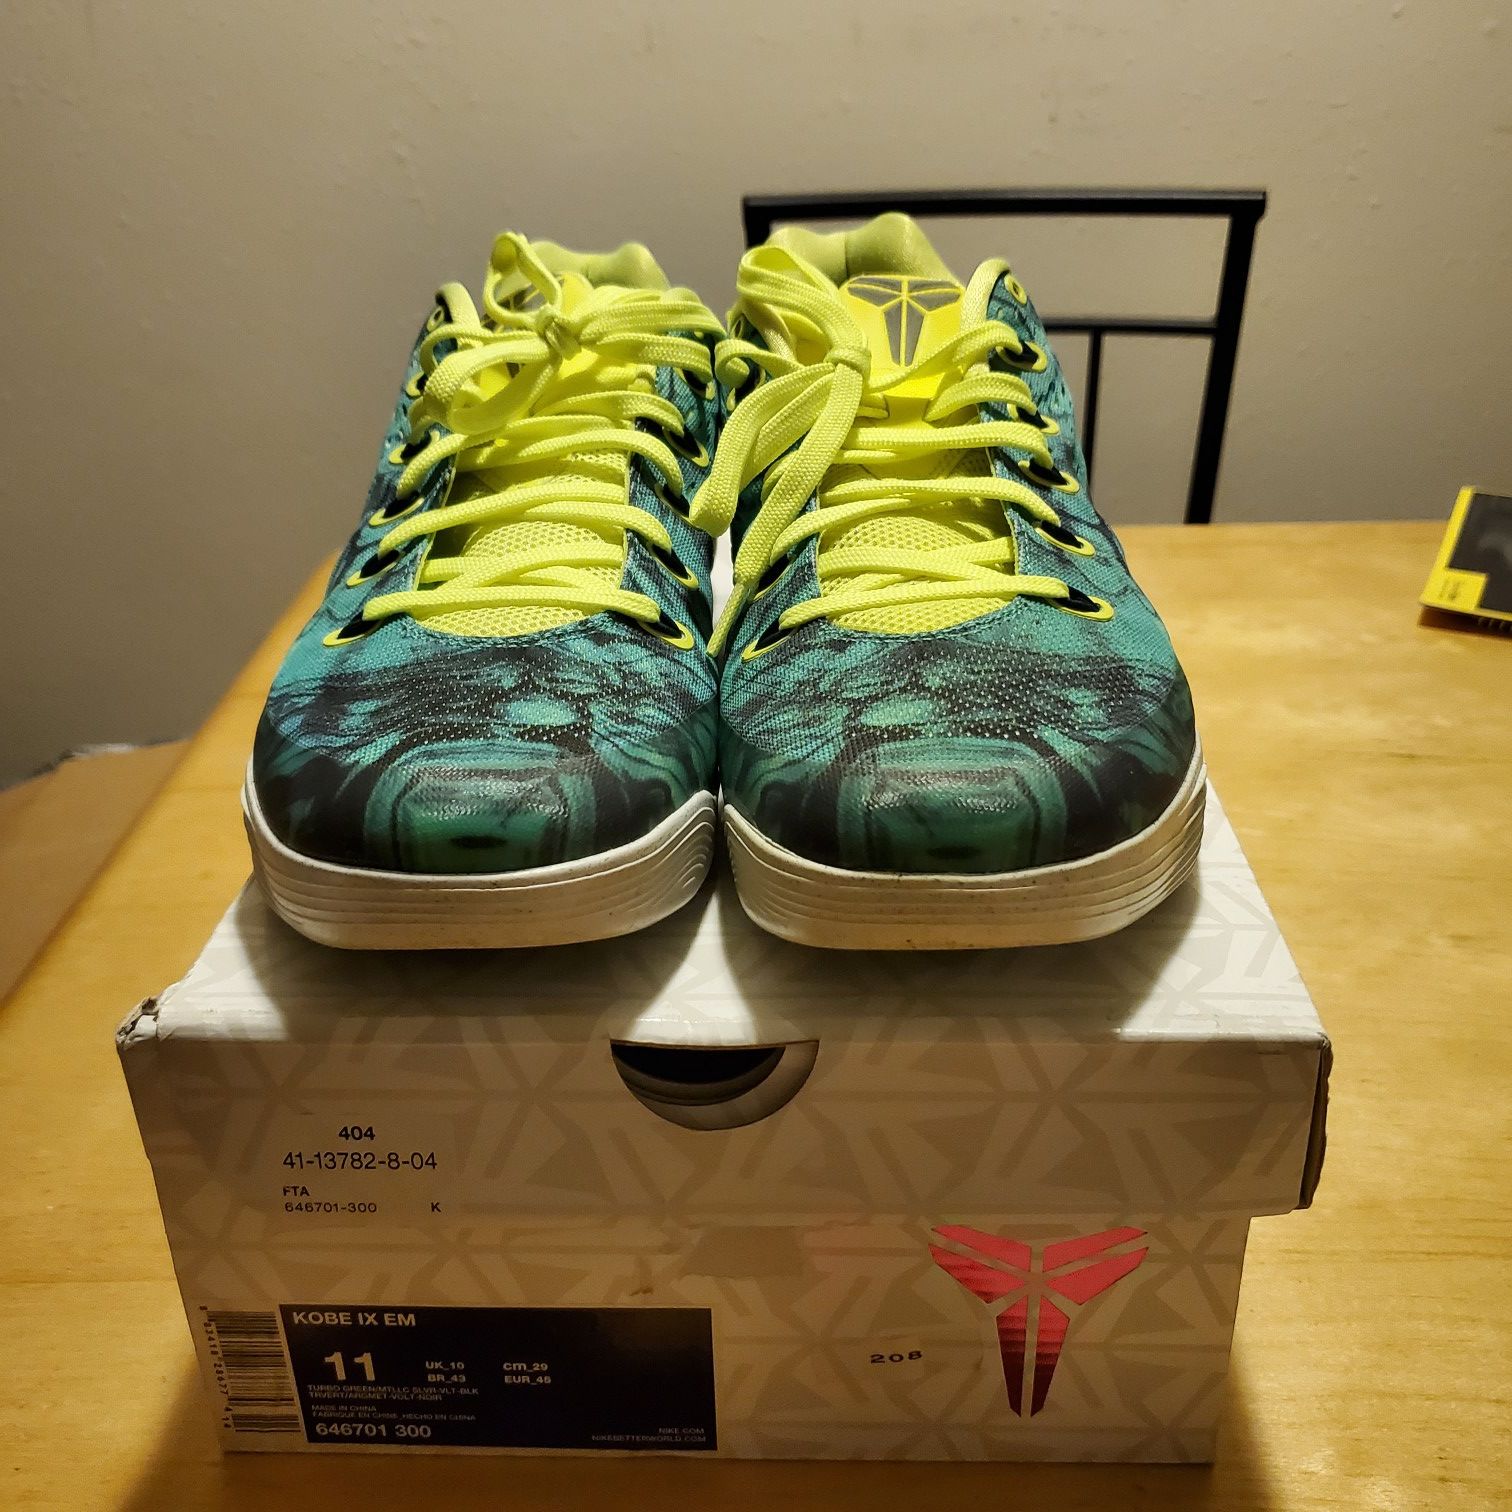 Kobe 9 low 'Easter' 100% Authentic